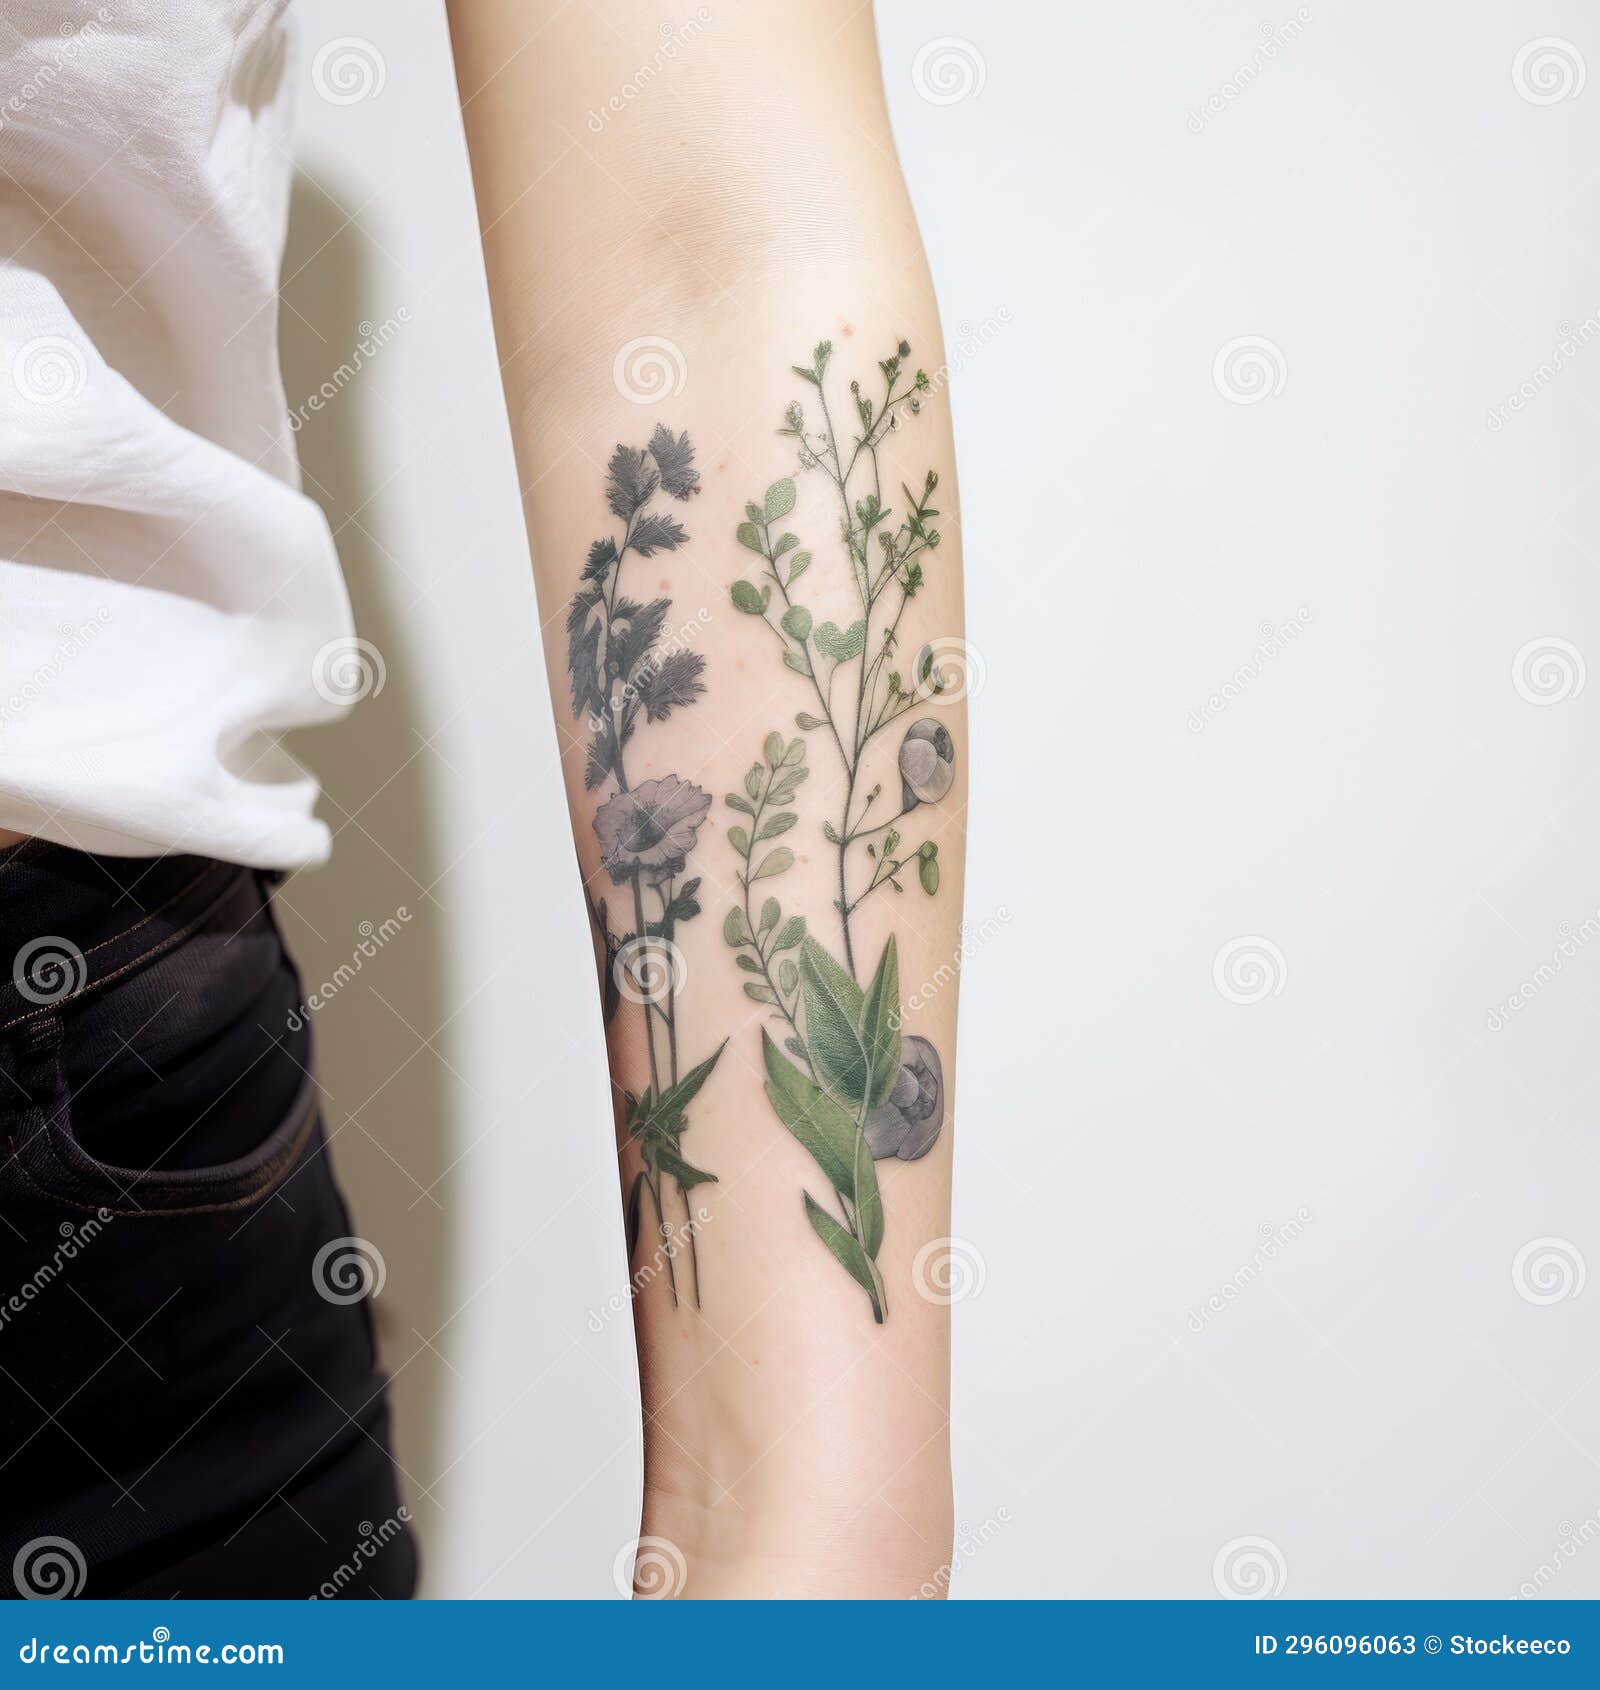 89 Flower Tattoos That Seem To Blossom On The Skin | Bored Panda